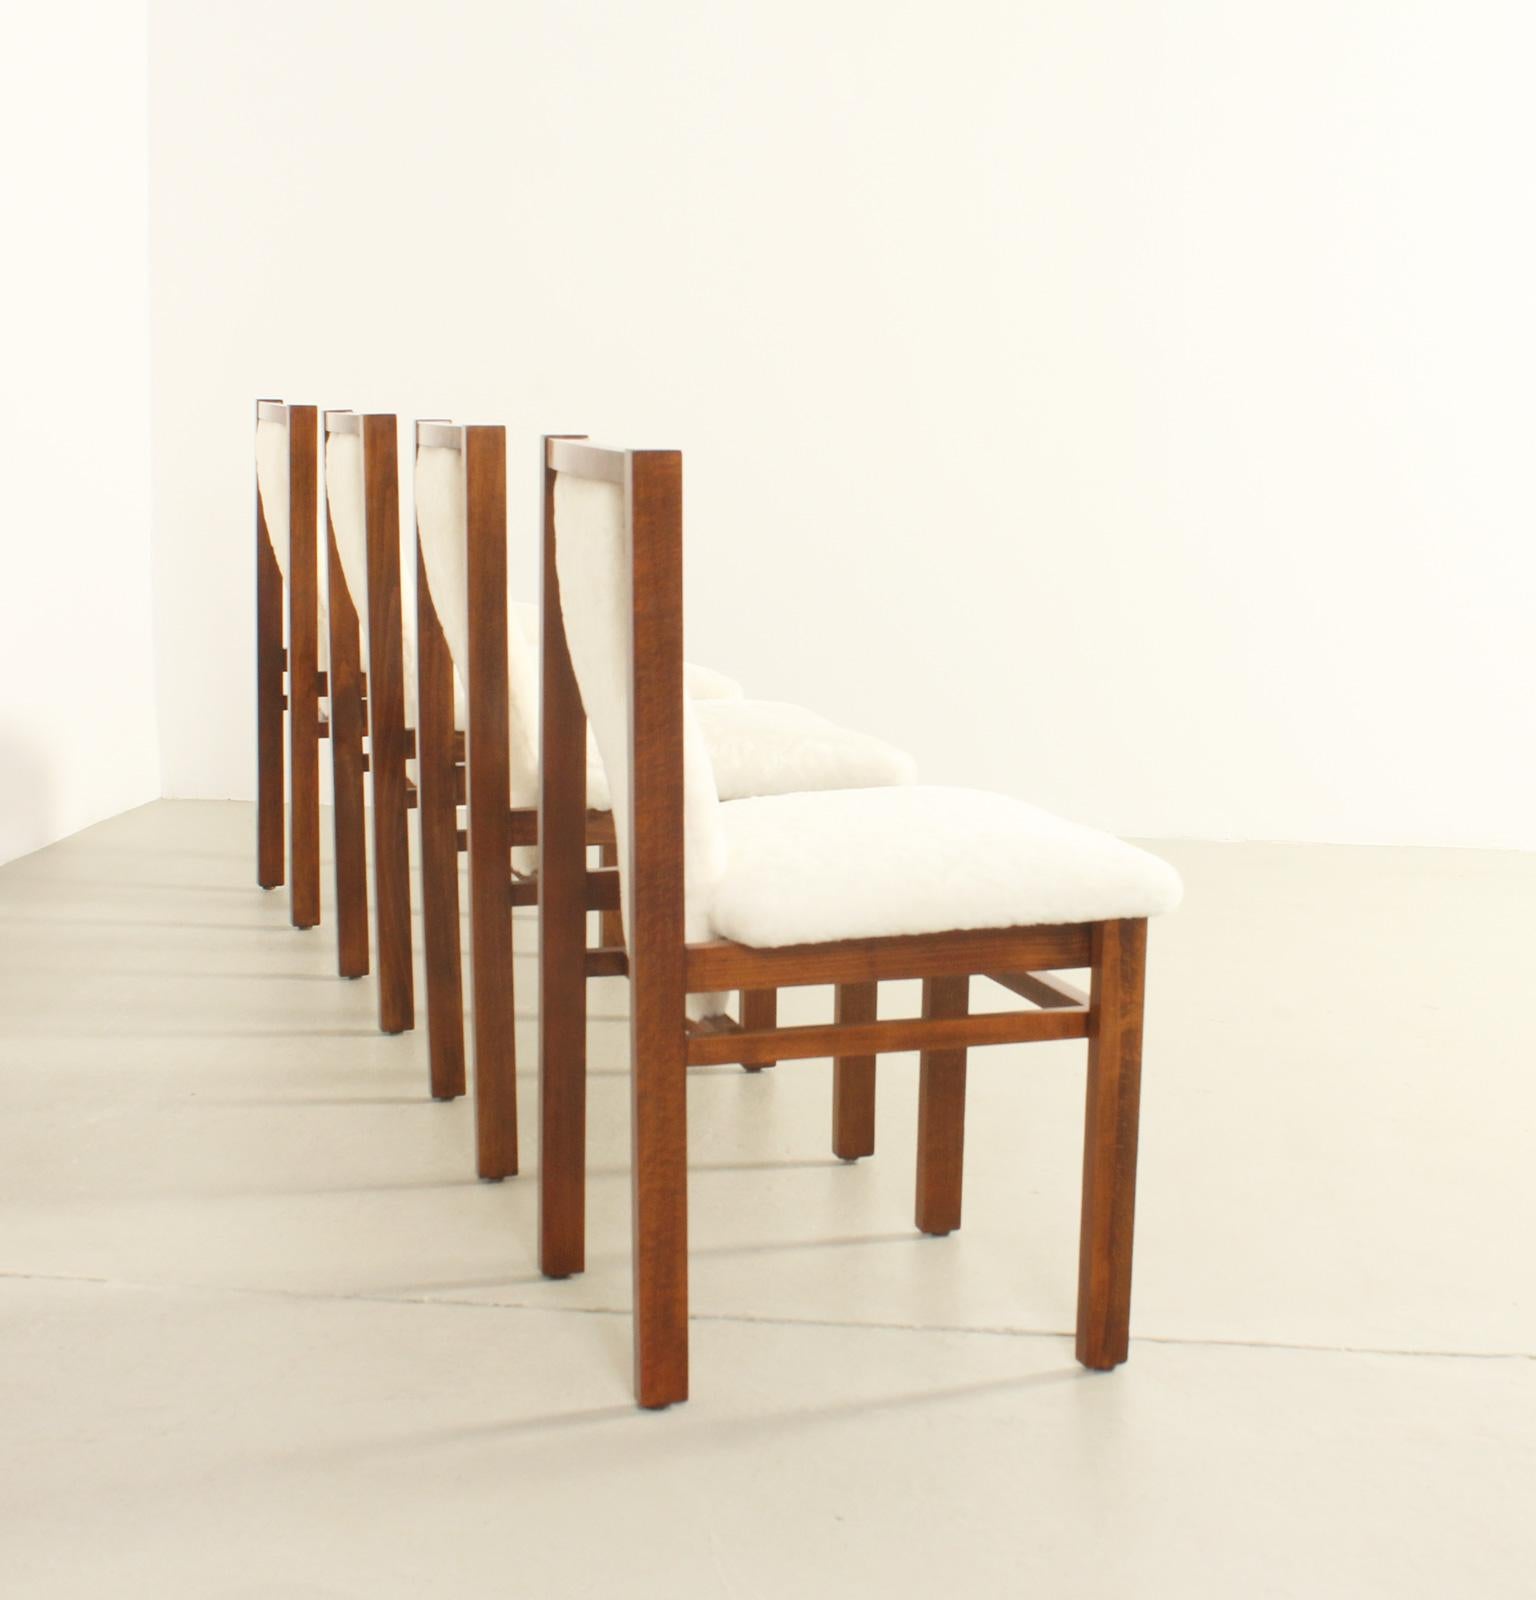 Four Dining Chairs by Jordi Vilanova in Oak Wood and Sheepskin, Spain, 1960's For Sale 7